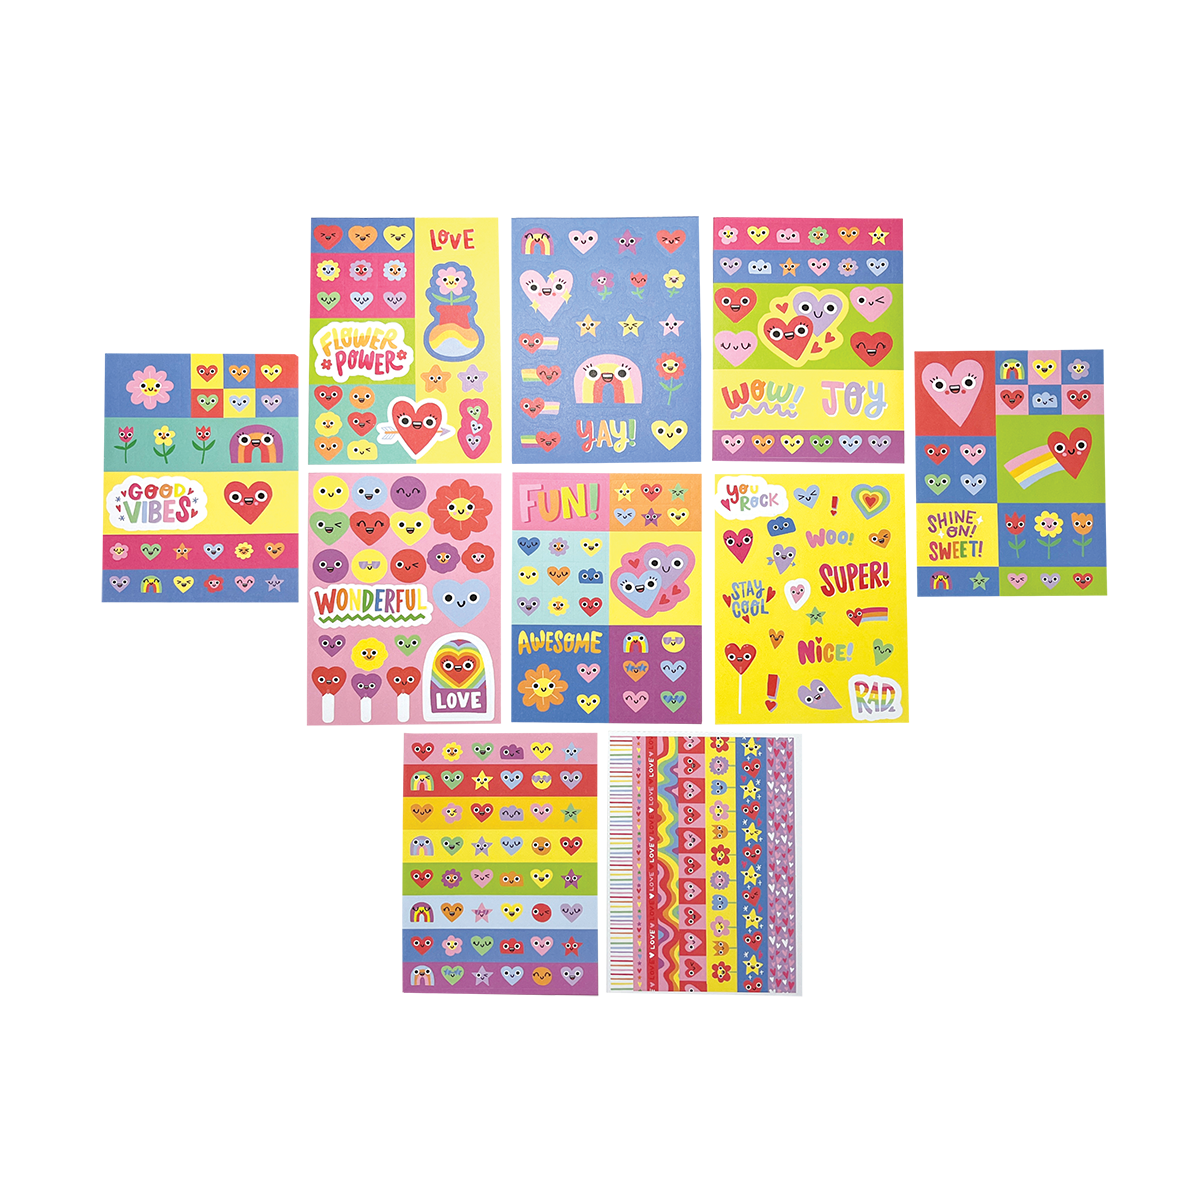 Brighten Your Craft Projects with Mini Heart Stickers by Ooly